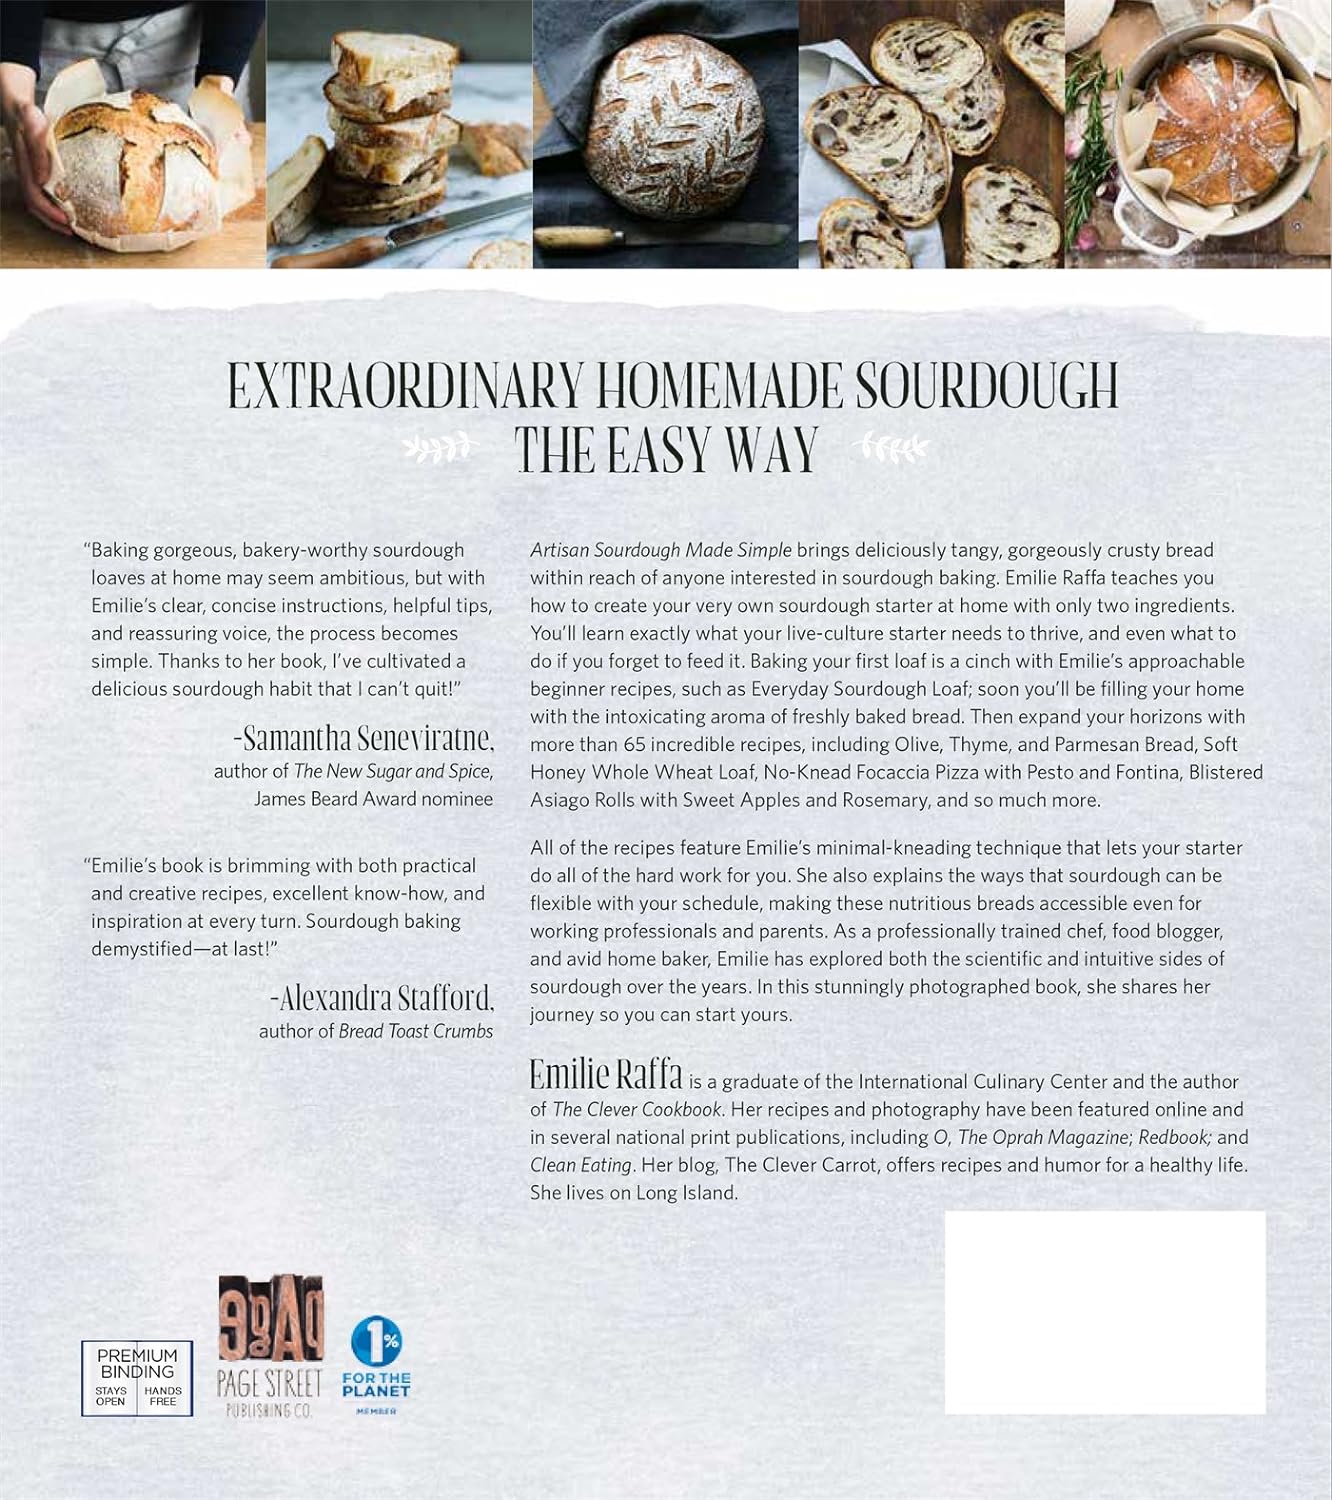 Artisan Sourdough Made Simple: A Beginner's Guide to Delicious Handcrafted Bread with Minimal Kneading - by Emilie Raffa